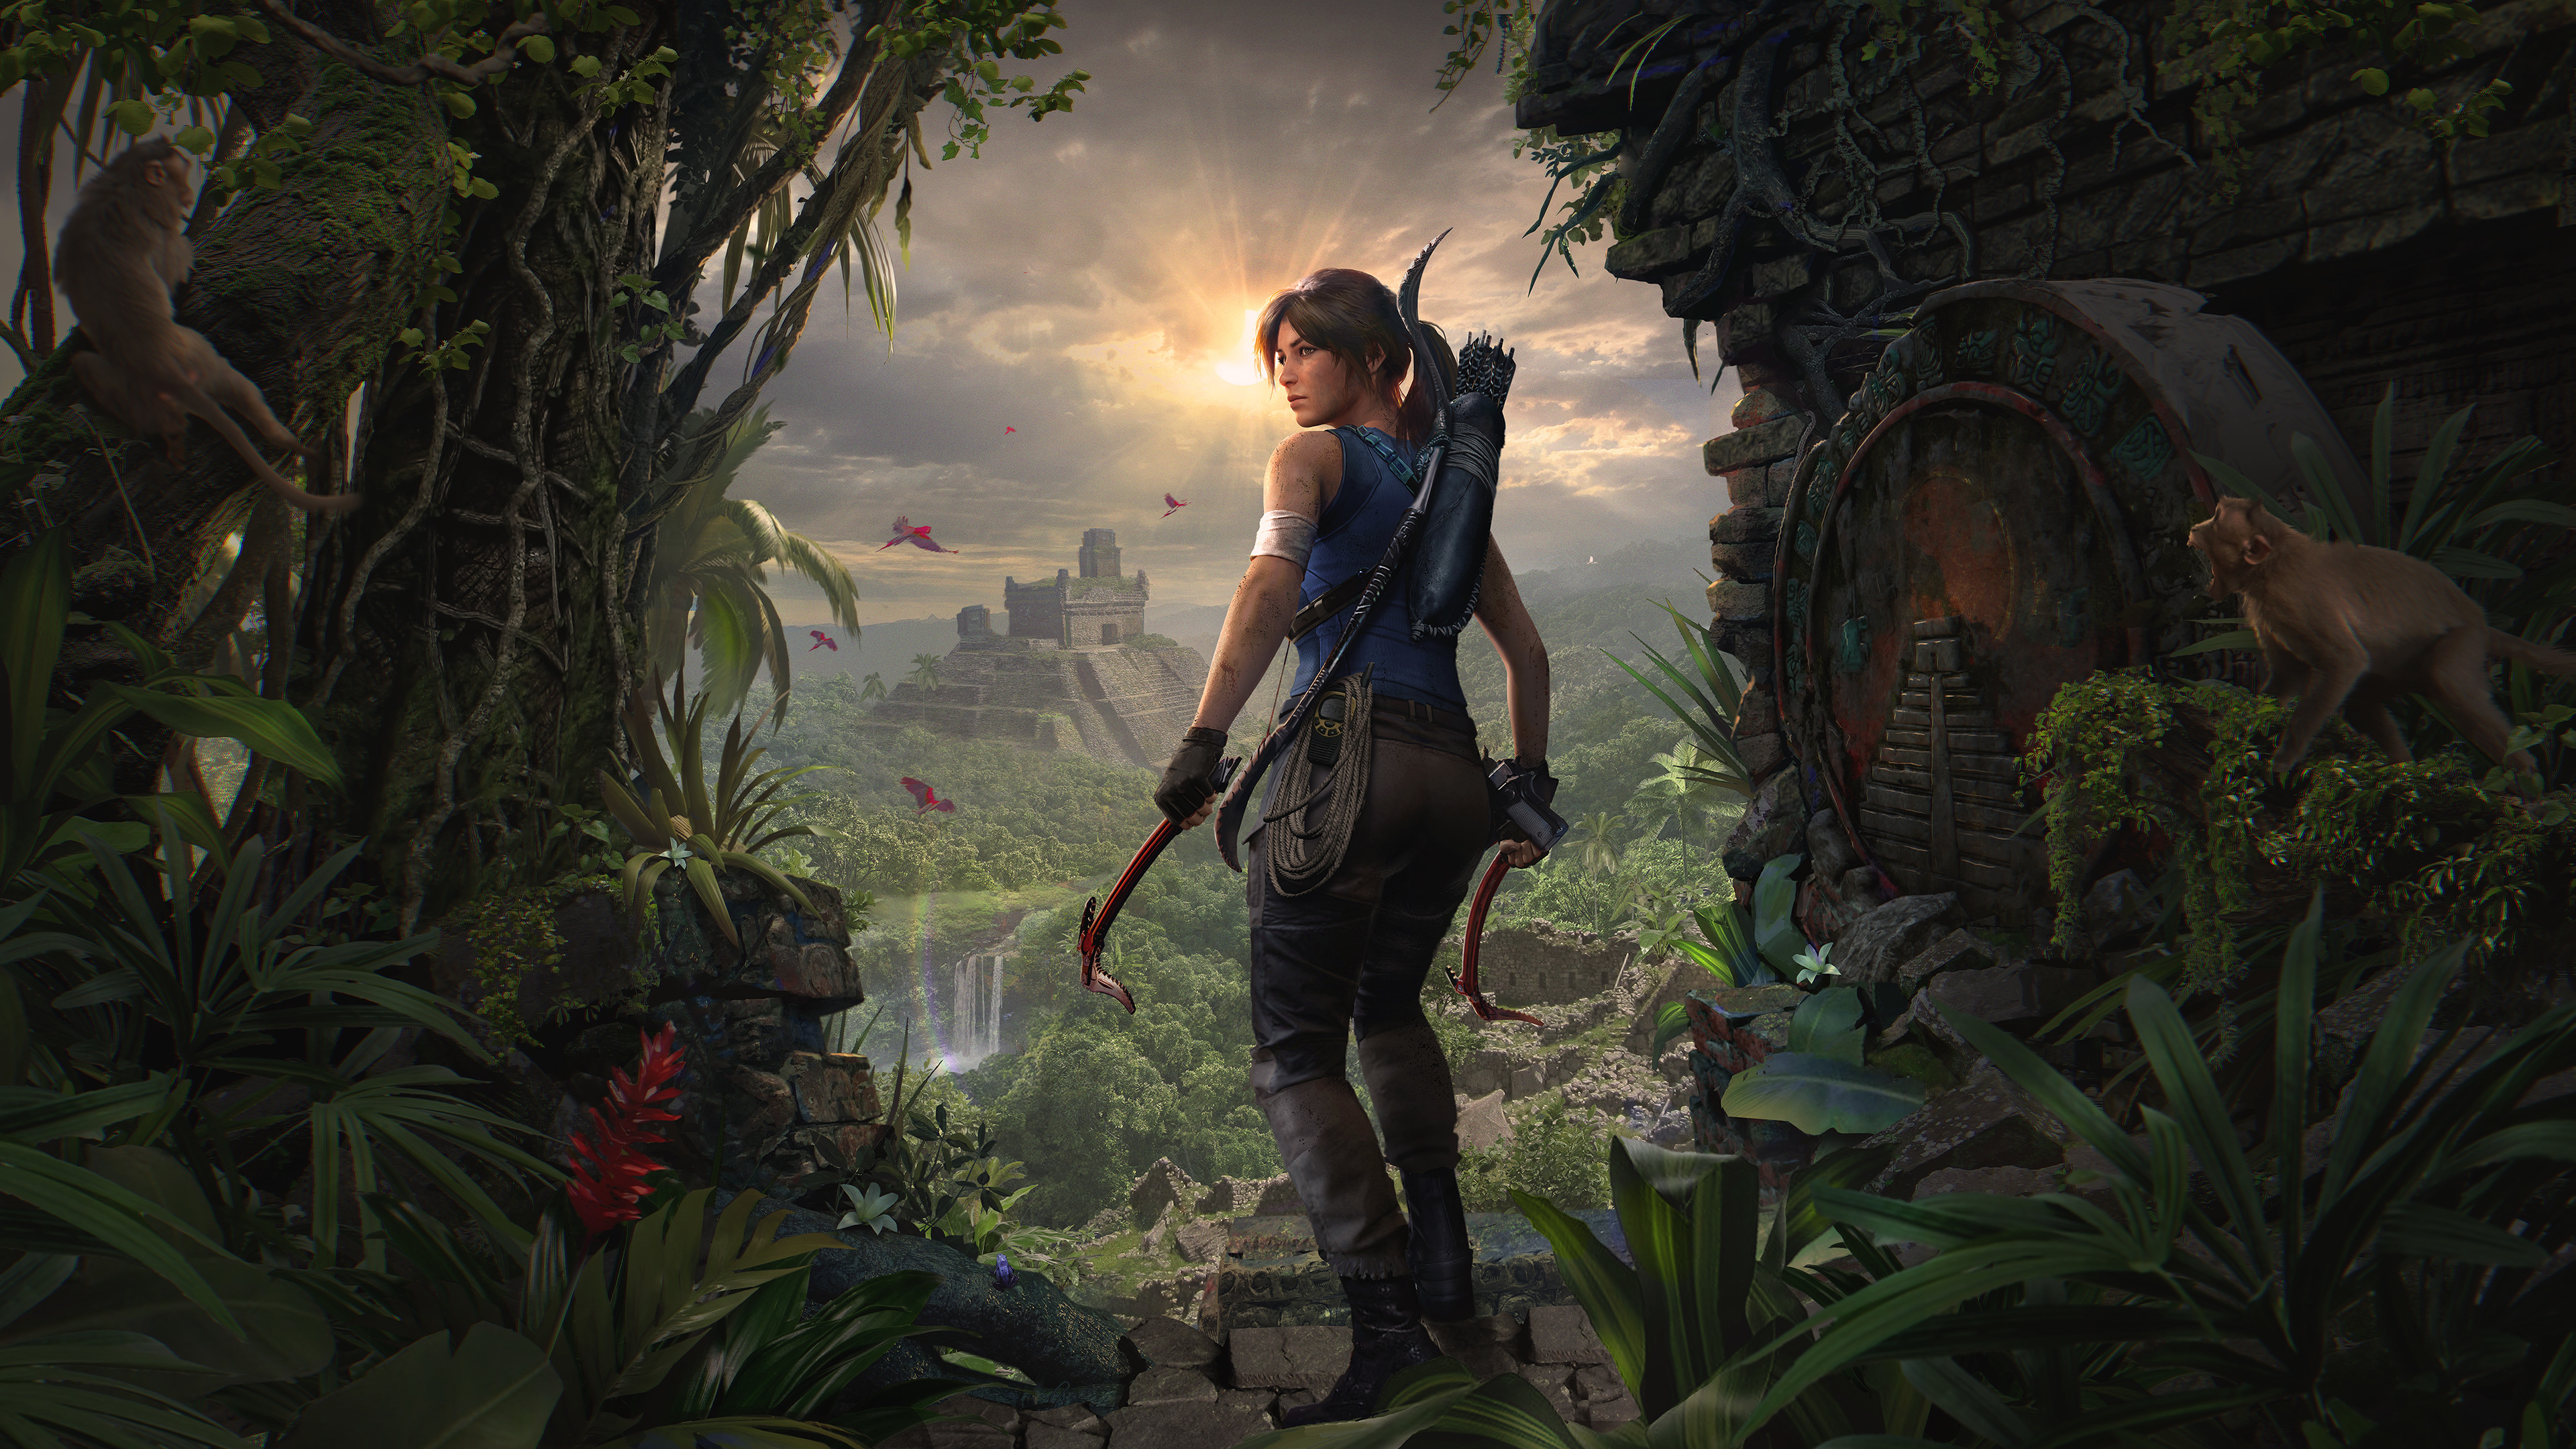 Lara Croft Wallpapers and Backgrounds - WallpaperCG